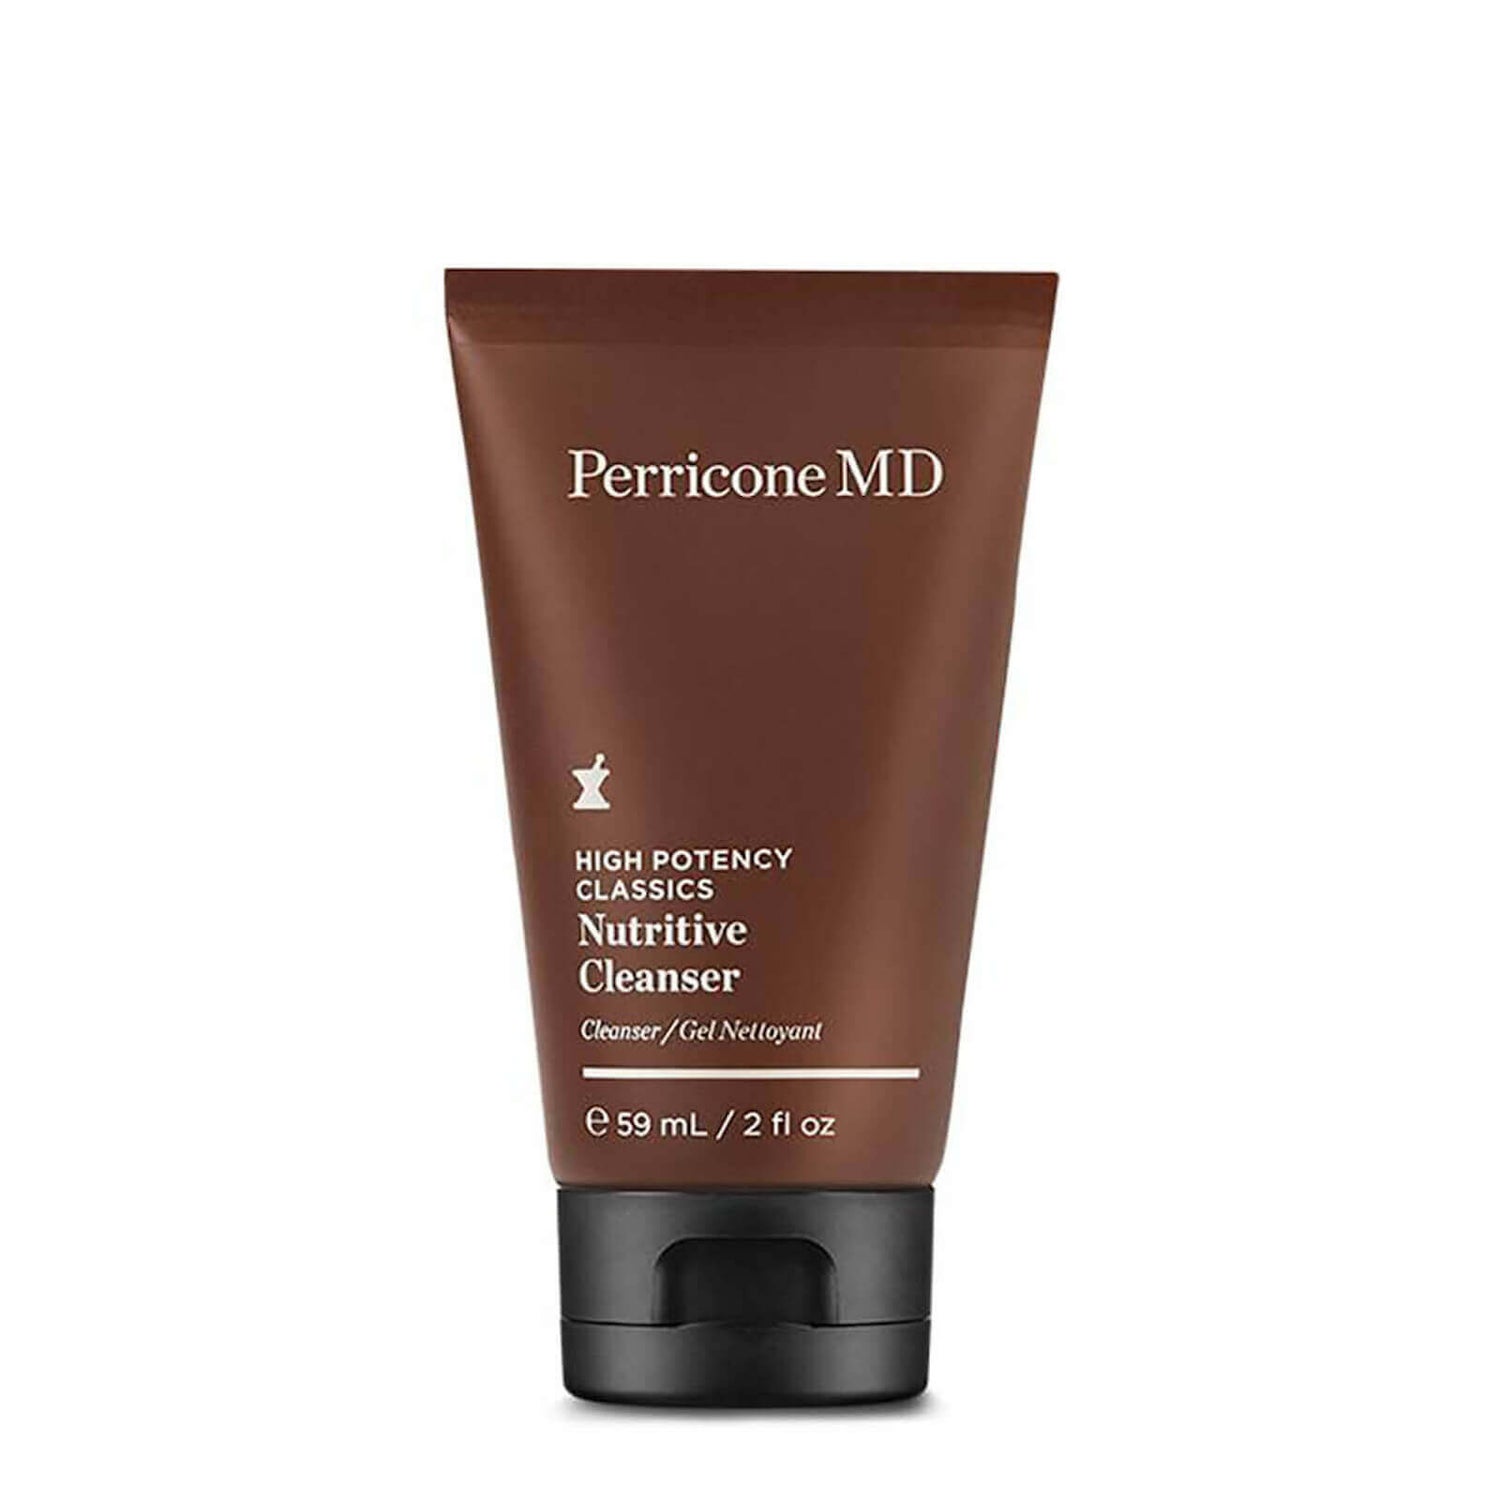 Perricone MD High Potency Classics Nutritive Cleanser Travel Size 59ml